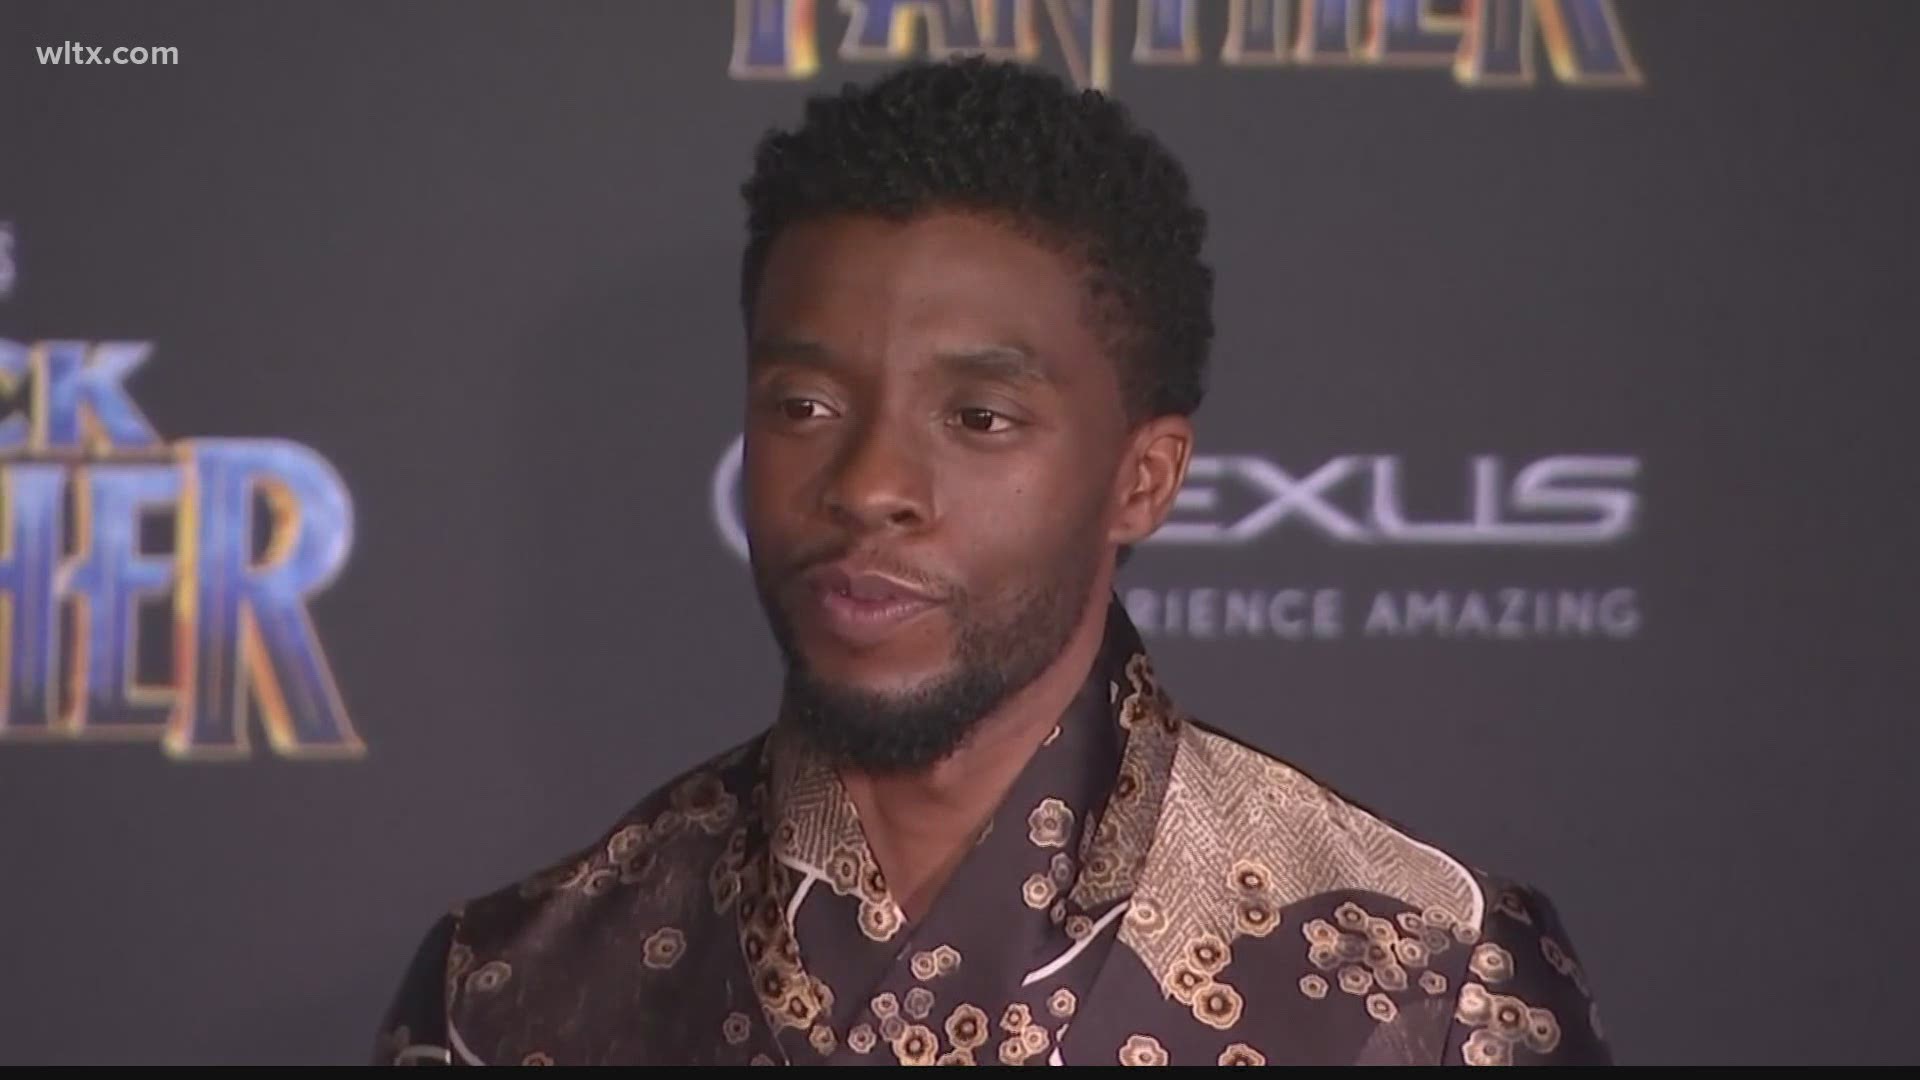 Howard University is renaming its College of Fine Arts after one of its most distinguished alumni: the late actor, director, writer and producer Chadwick A. Boseman.